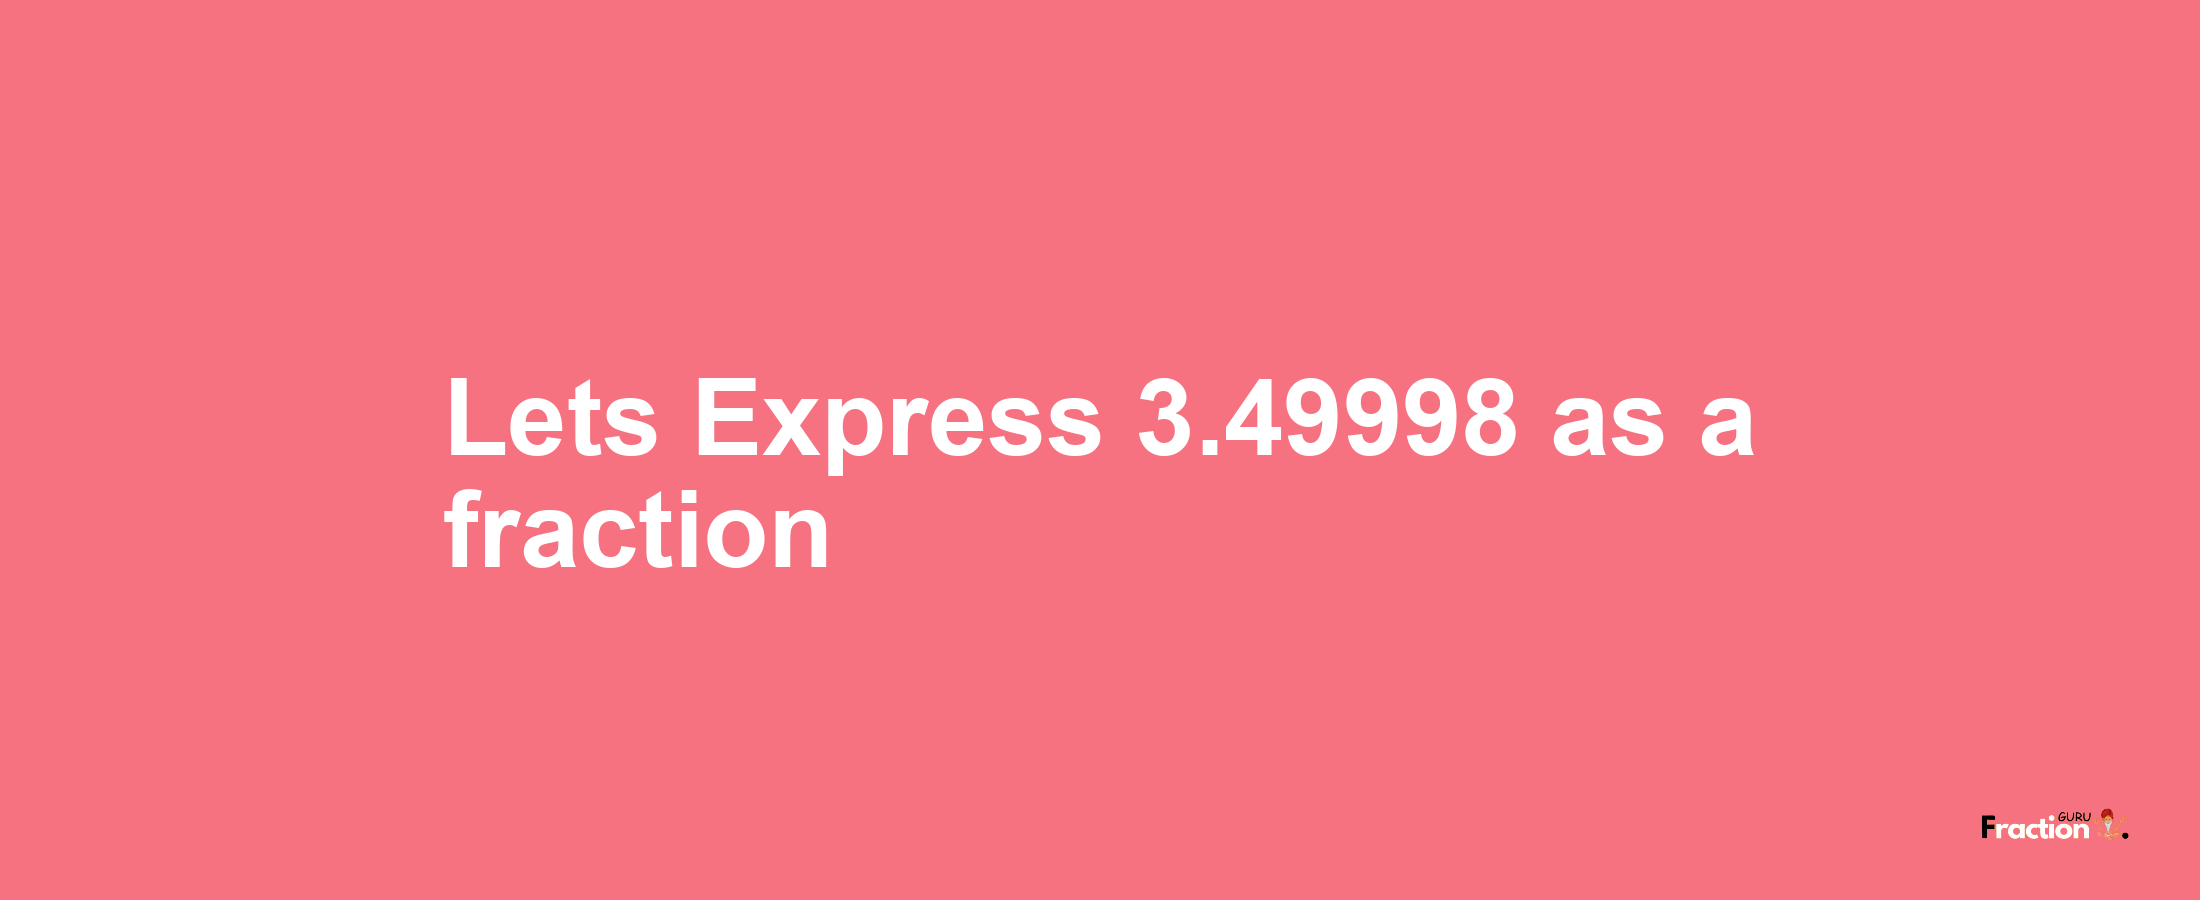 Lets Express 3.49998 as afraction